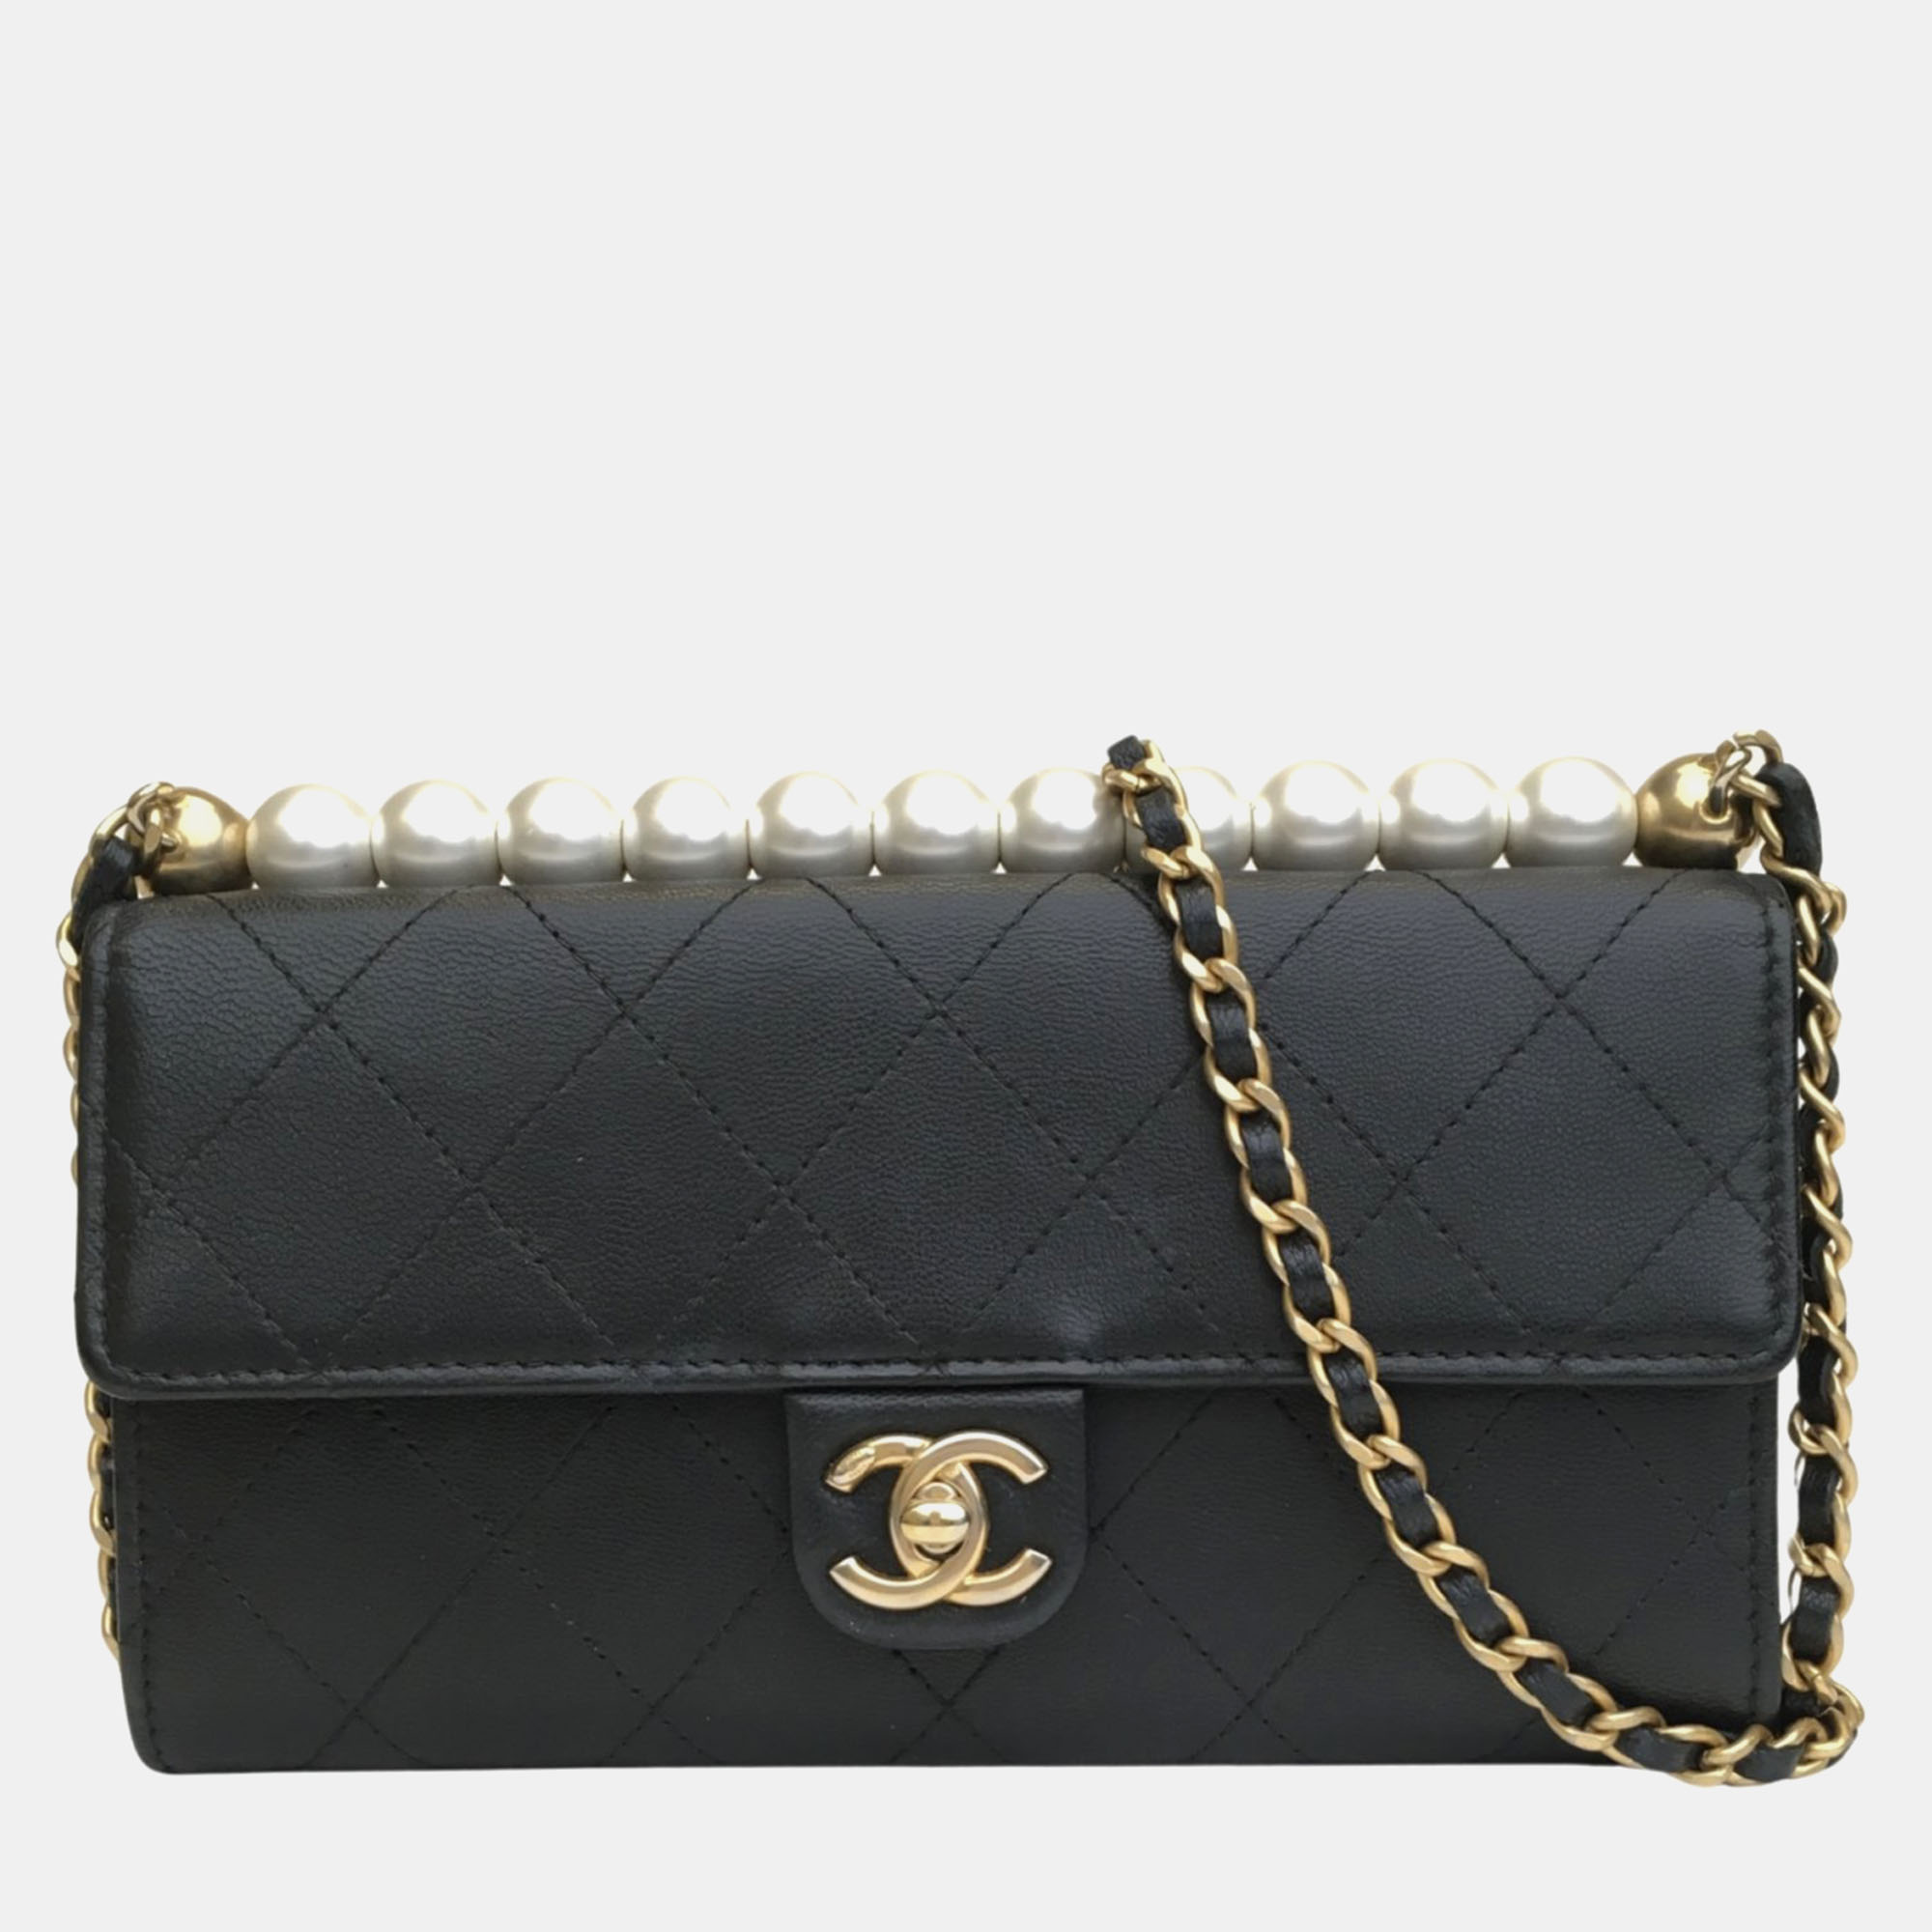 Chanel black goatskin quilted chic pearls clutch with chain